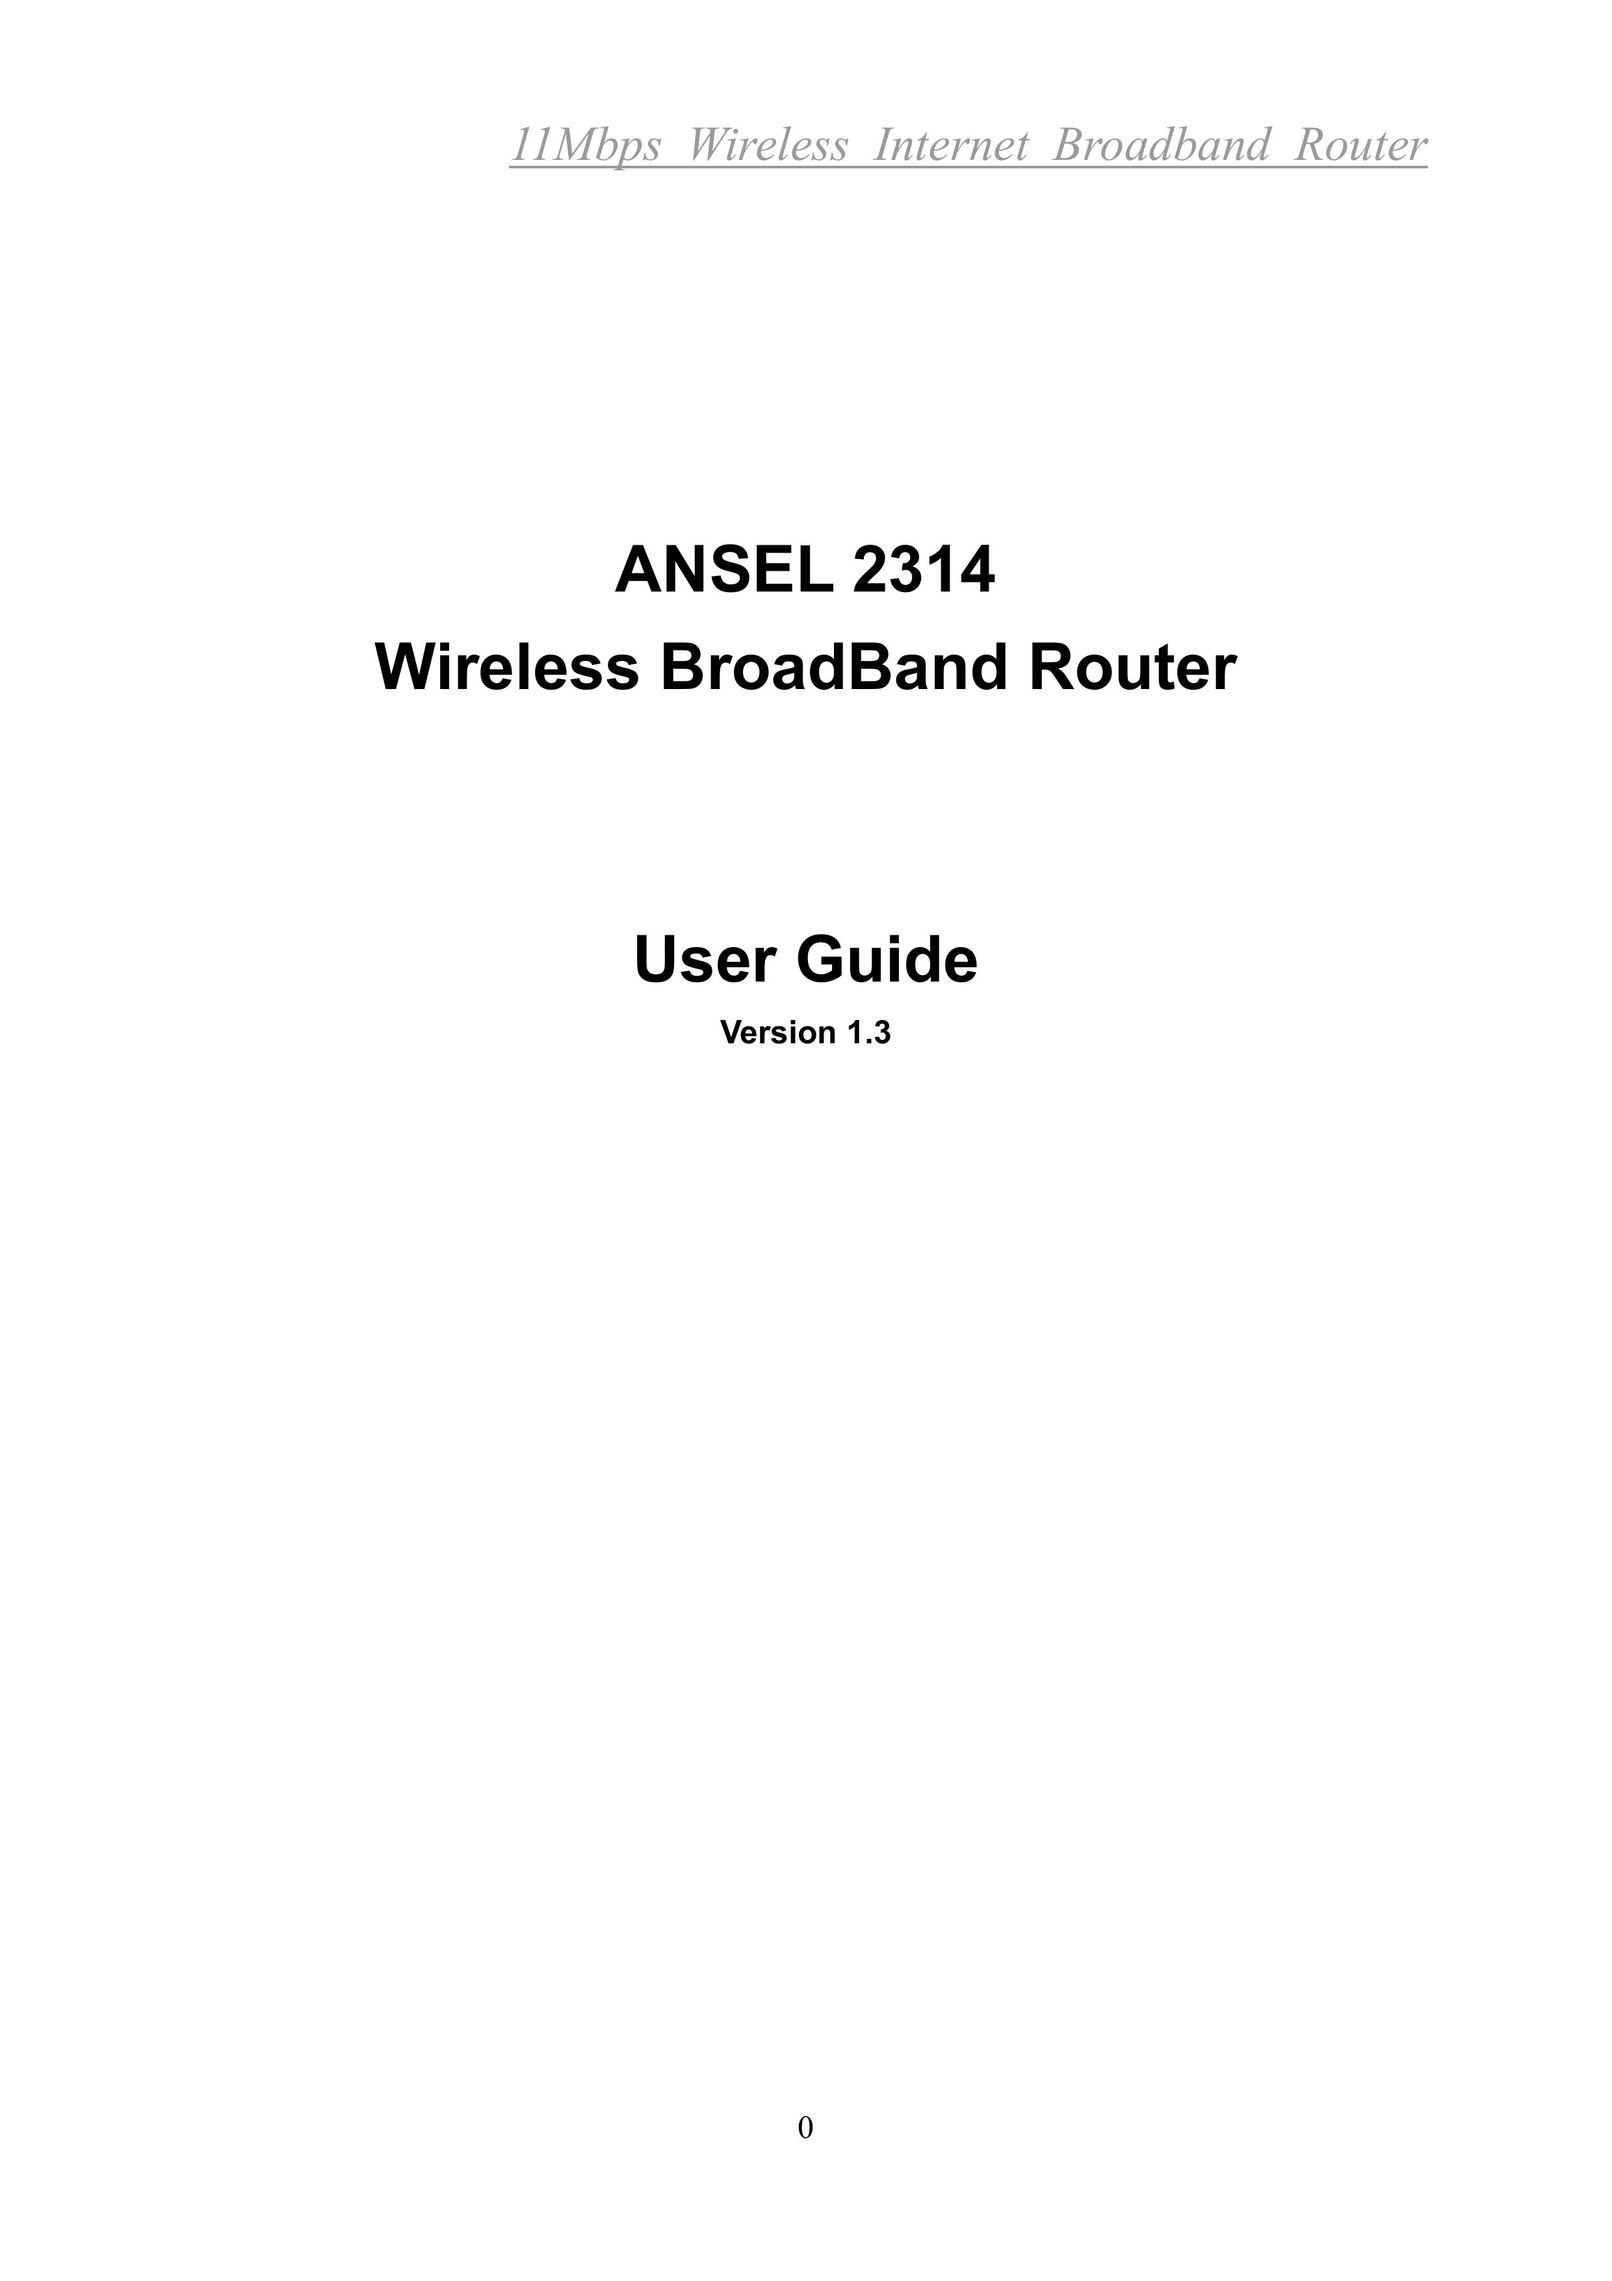 Xerox 2314 Network Router User Manual